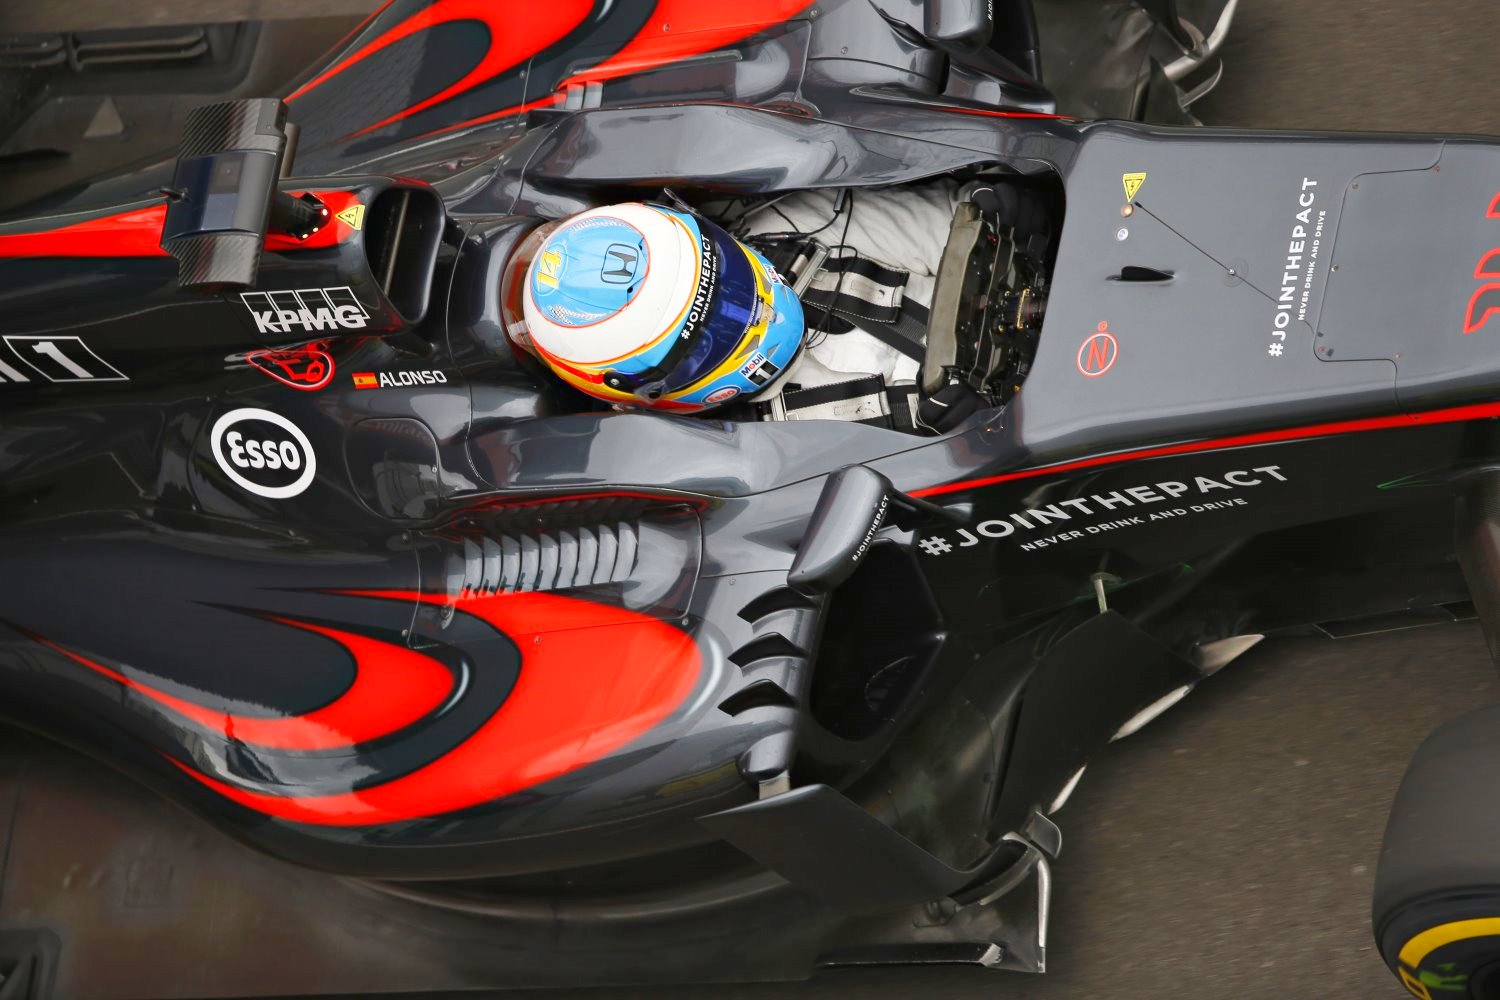 Signs of Progress for McLaren-Honda - the new engine in Alonso's car in practice had a much different engine note